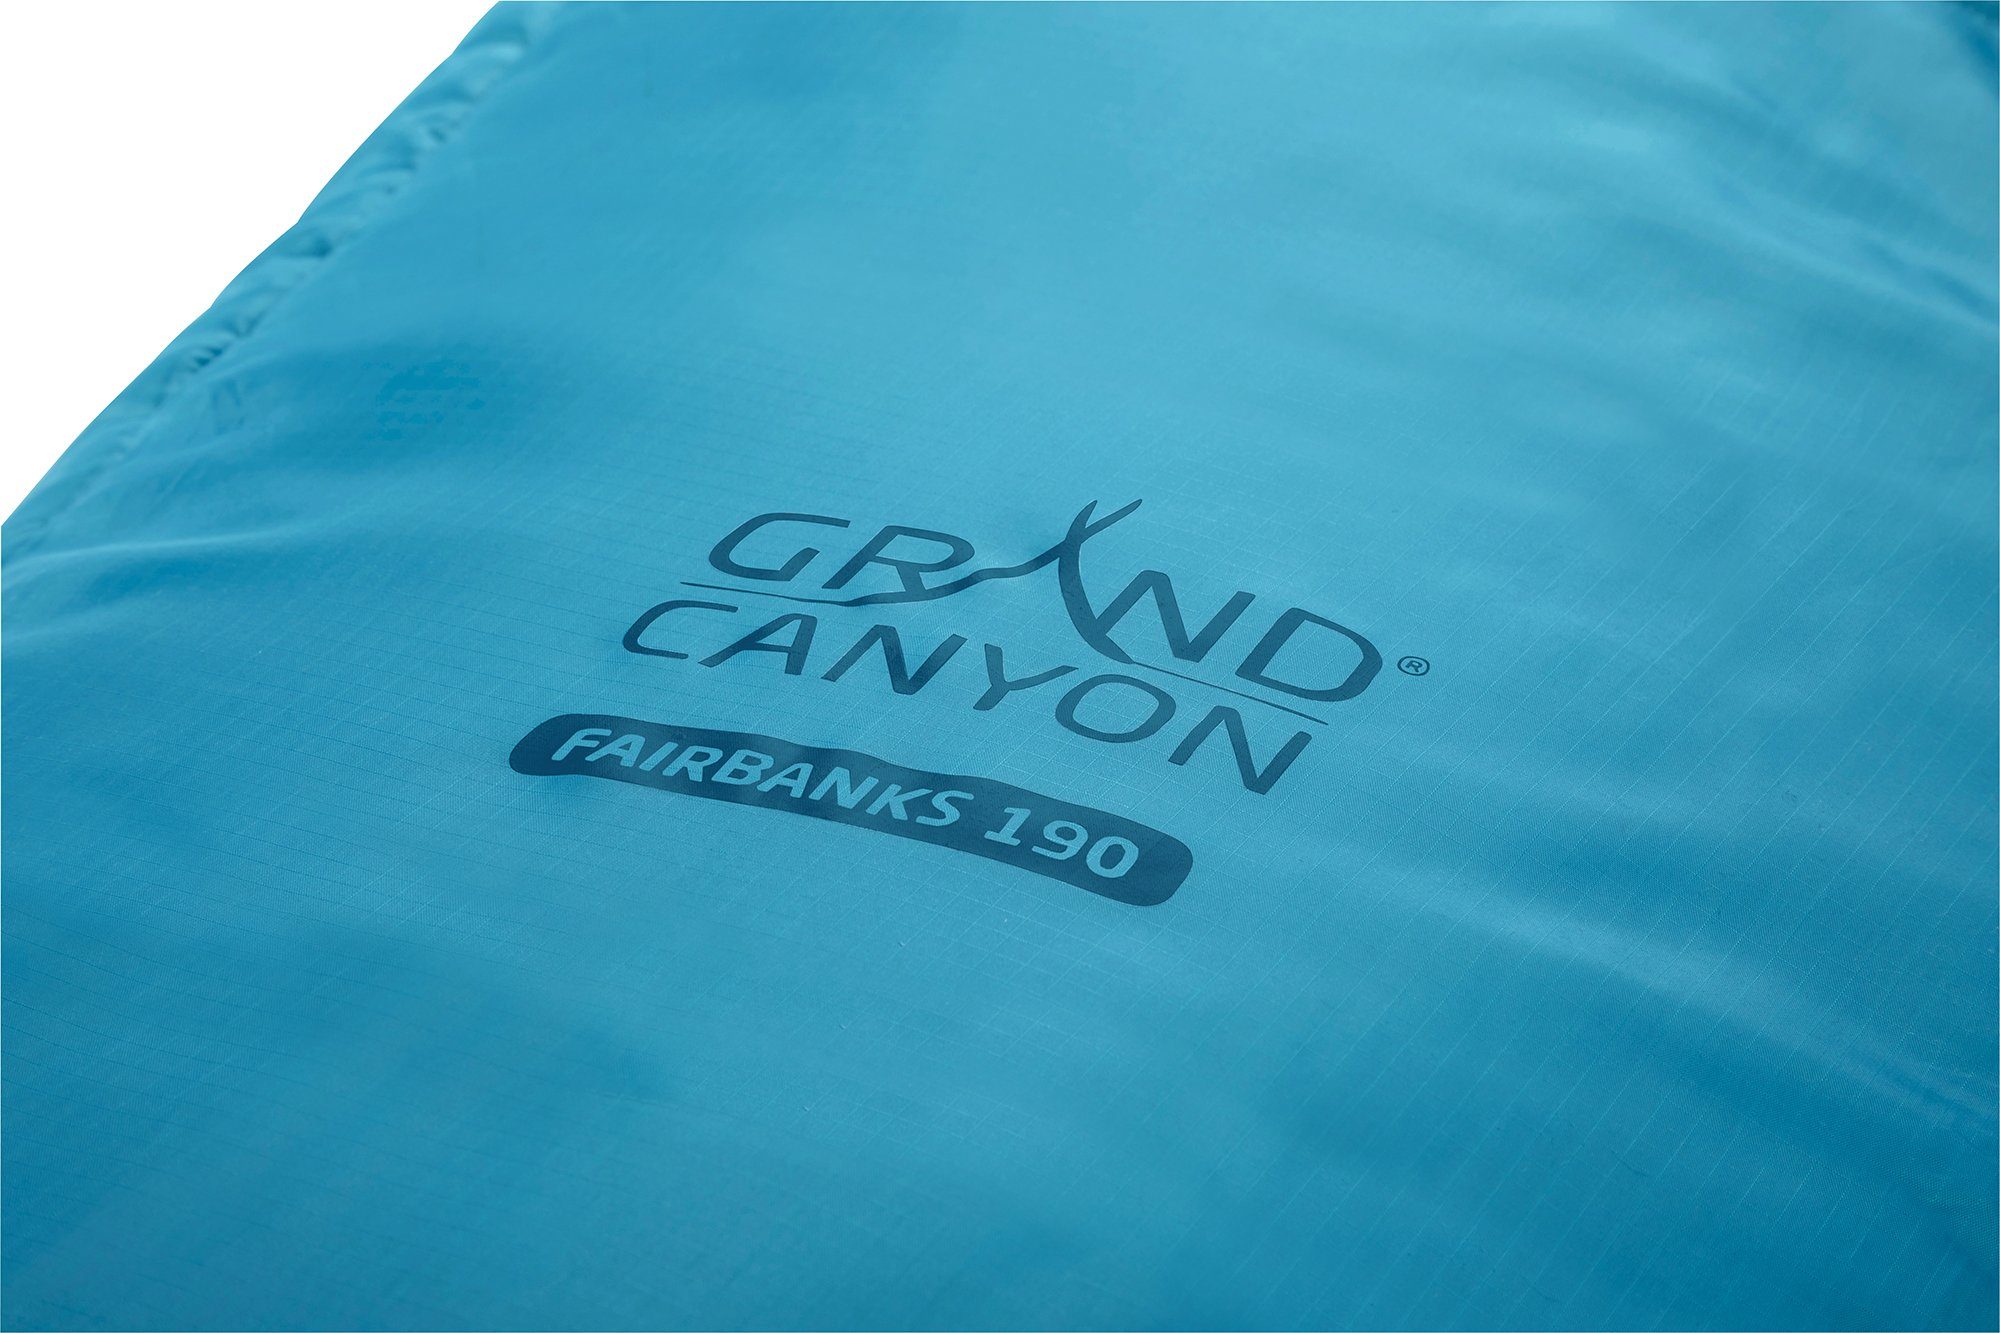 Canell Bay (2 Mumienschlafsack FAIRBANKS tlg) GRAND CANYON